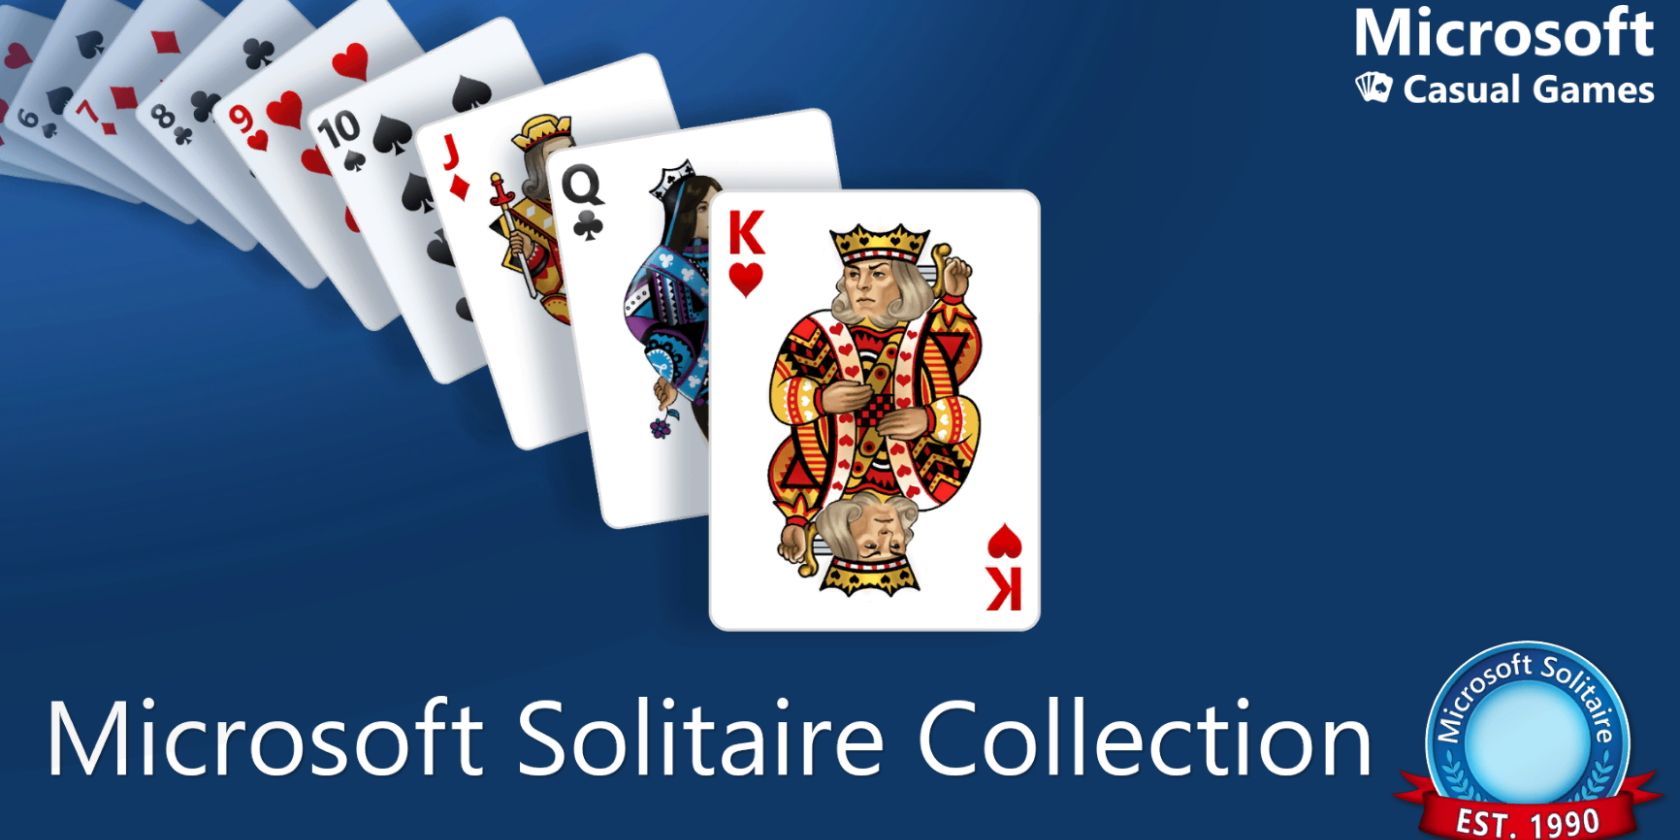 Microsoft Solitaire Collection - Learn more about other Solitaire games available in the Microsoft Solitaire Collection.
Microsoft Support - Find helpful articles, guides, and troubleshooting solutions for Microsoft Solitaire.